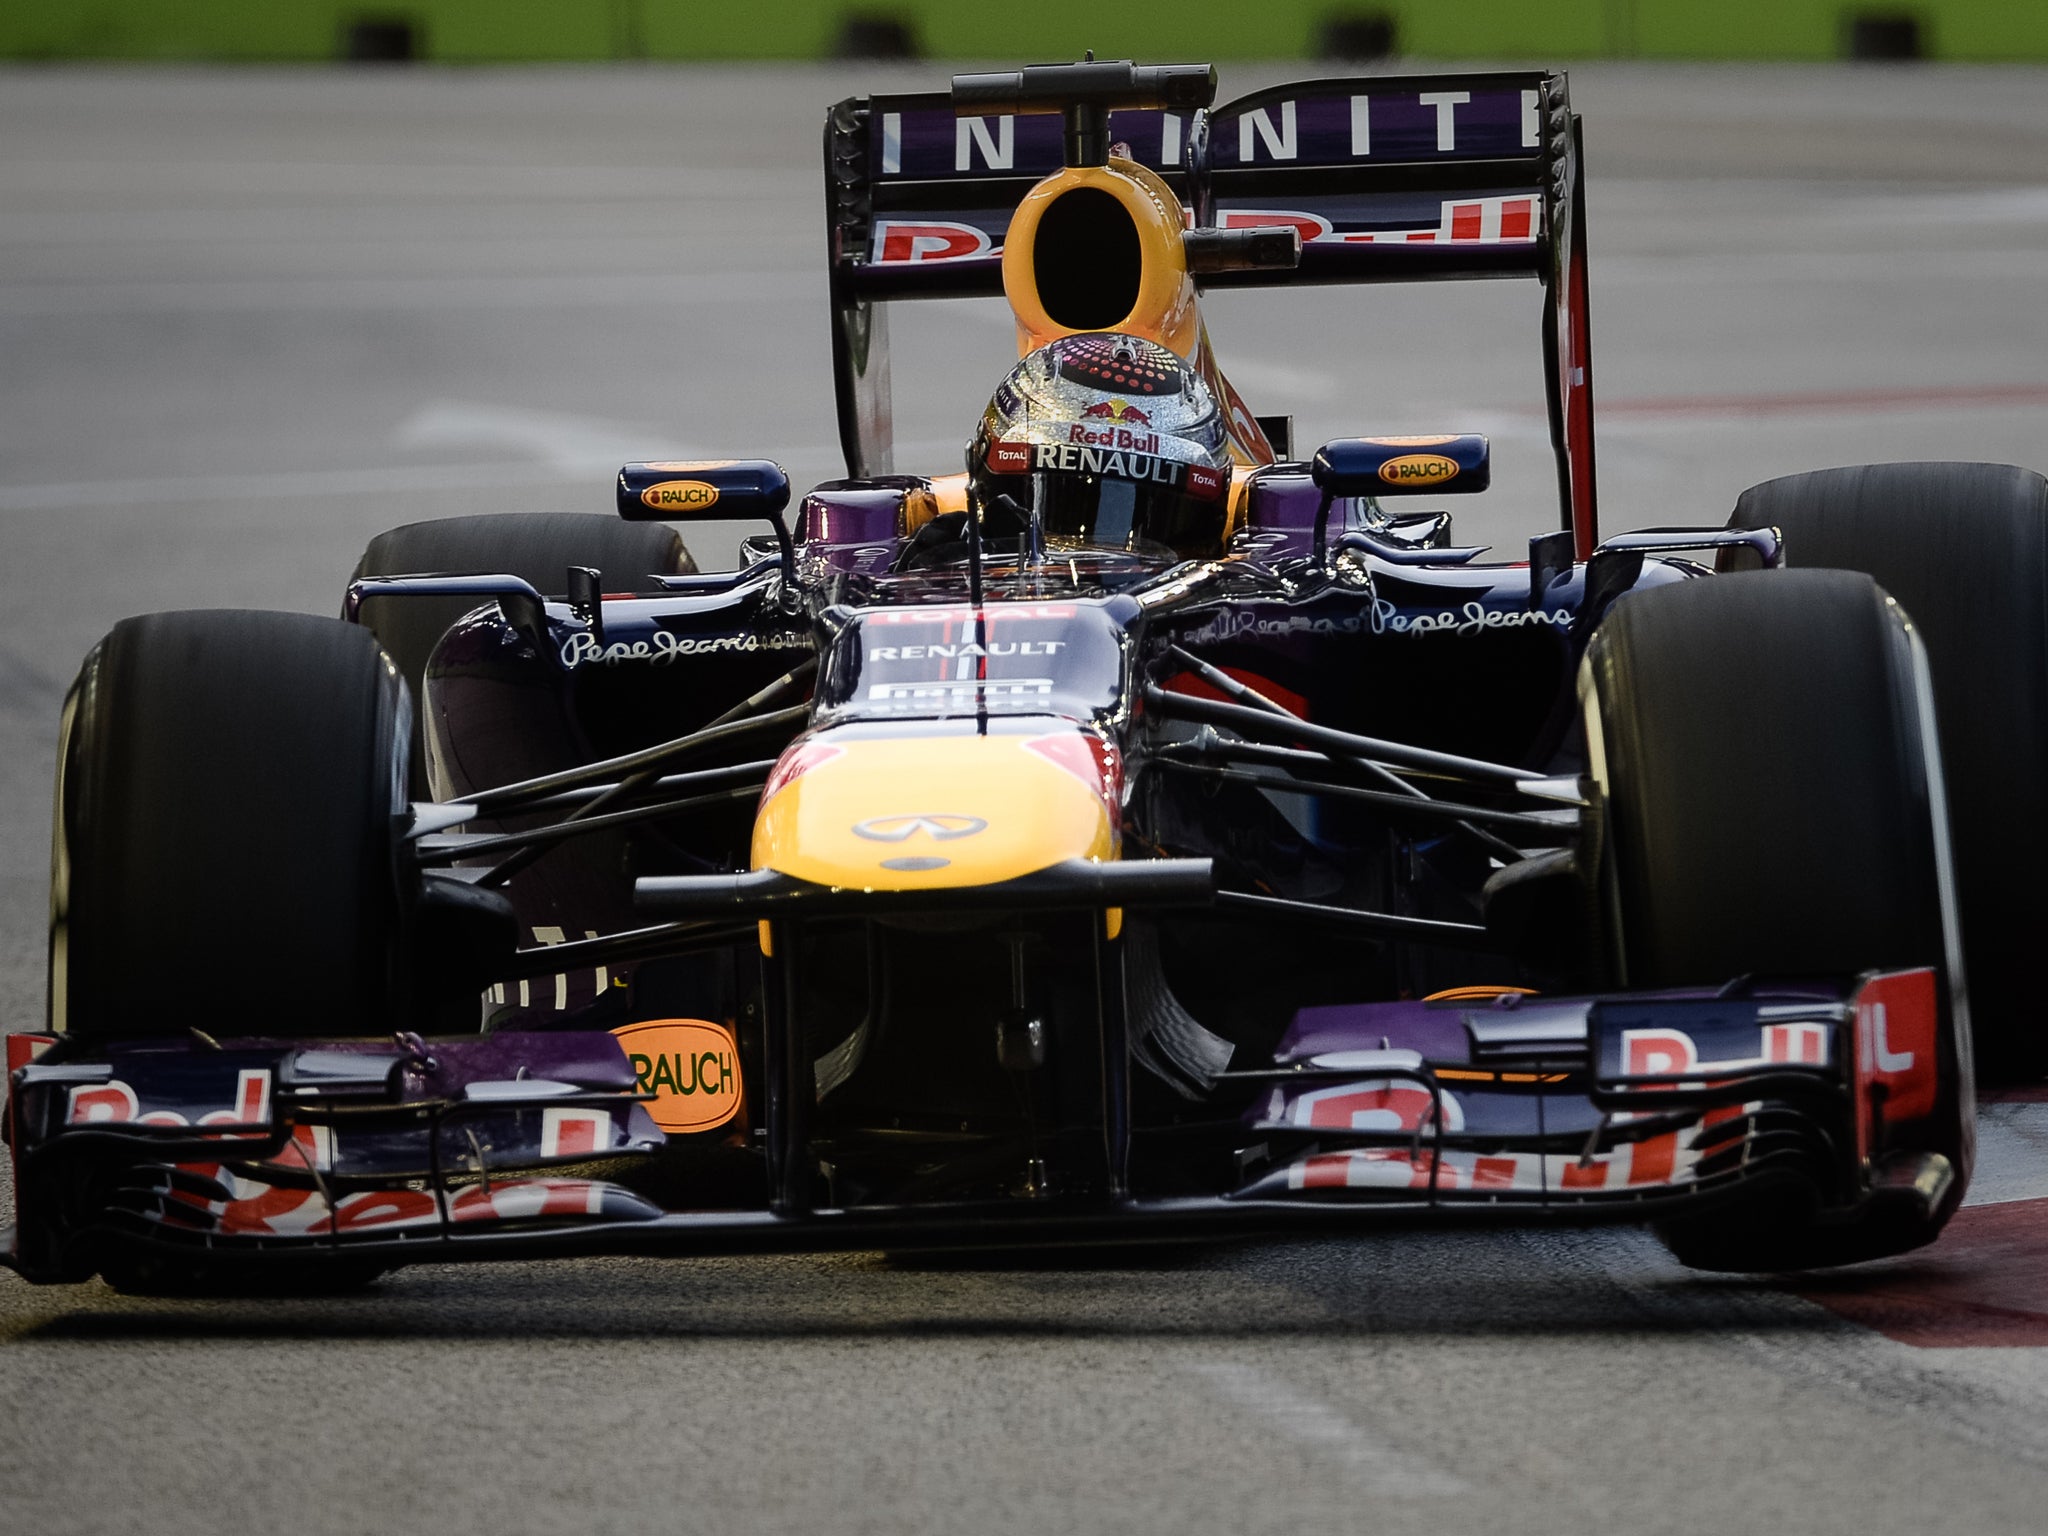 Sebastian Vettel on his way to pole position for the Singapore Grand Prix